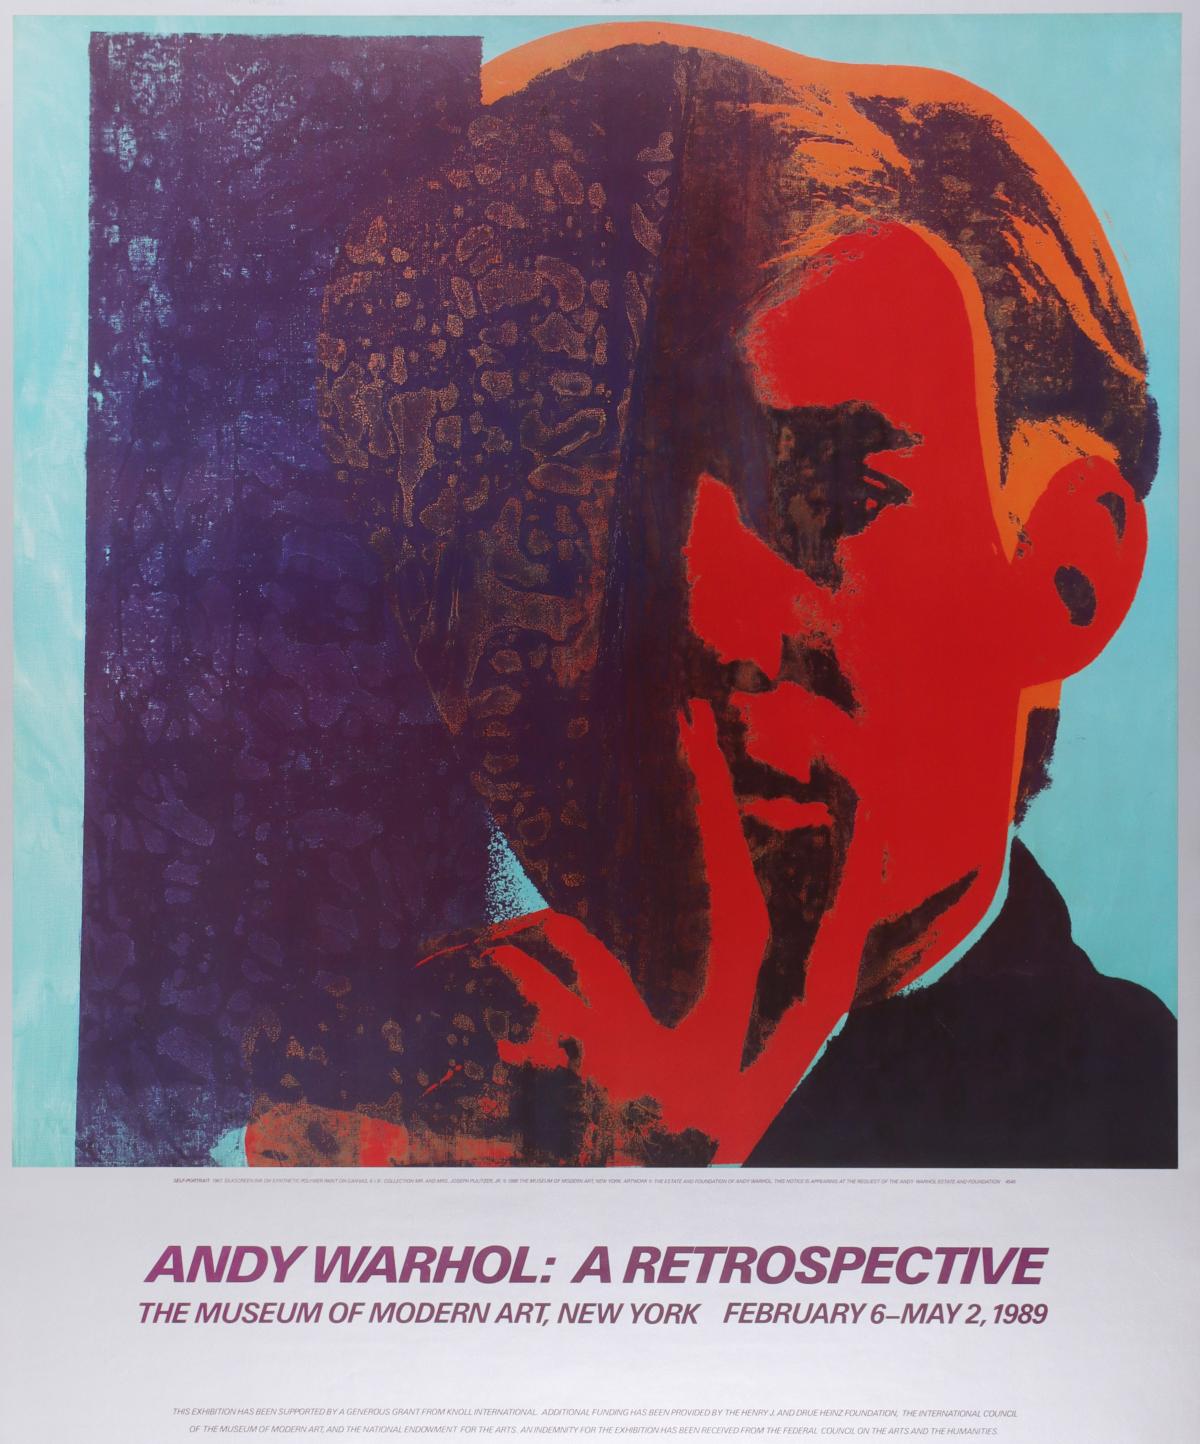 A 1989 POSTER FOR ANDY WARHOL EXHIBITION AT MOMA